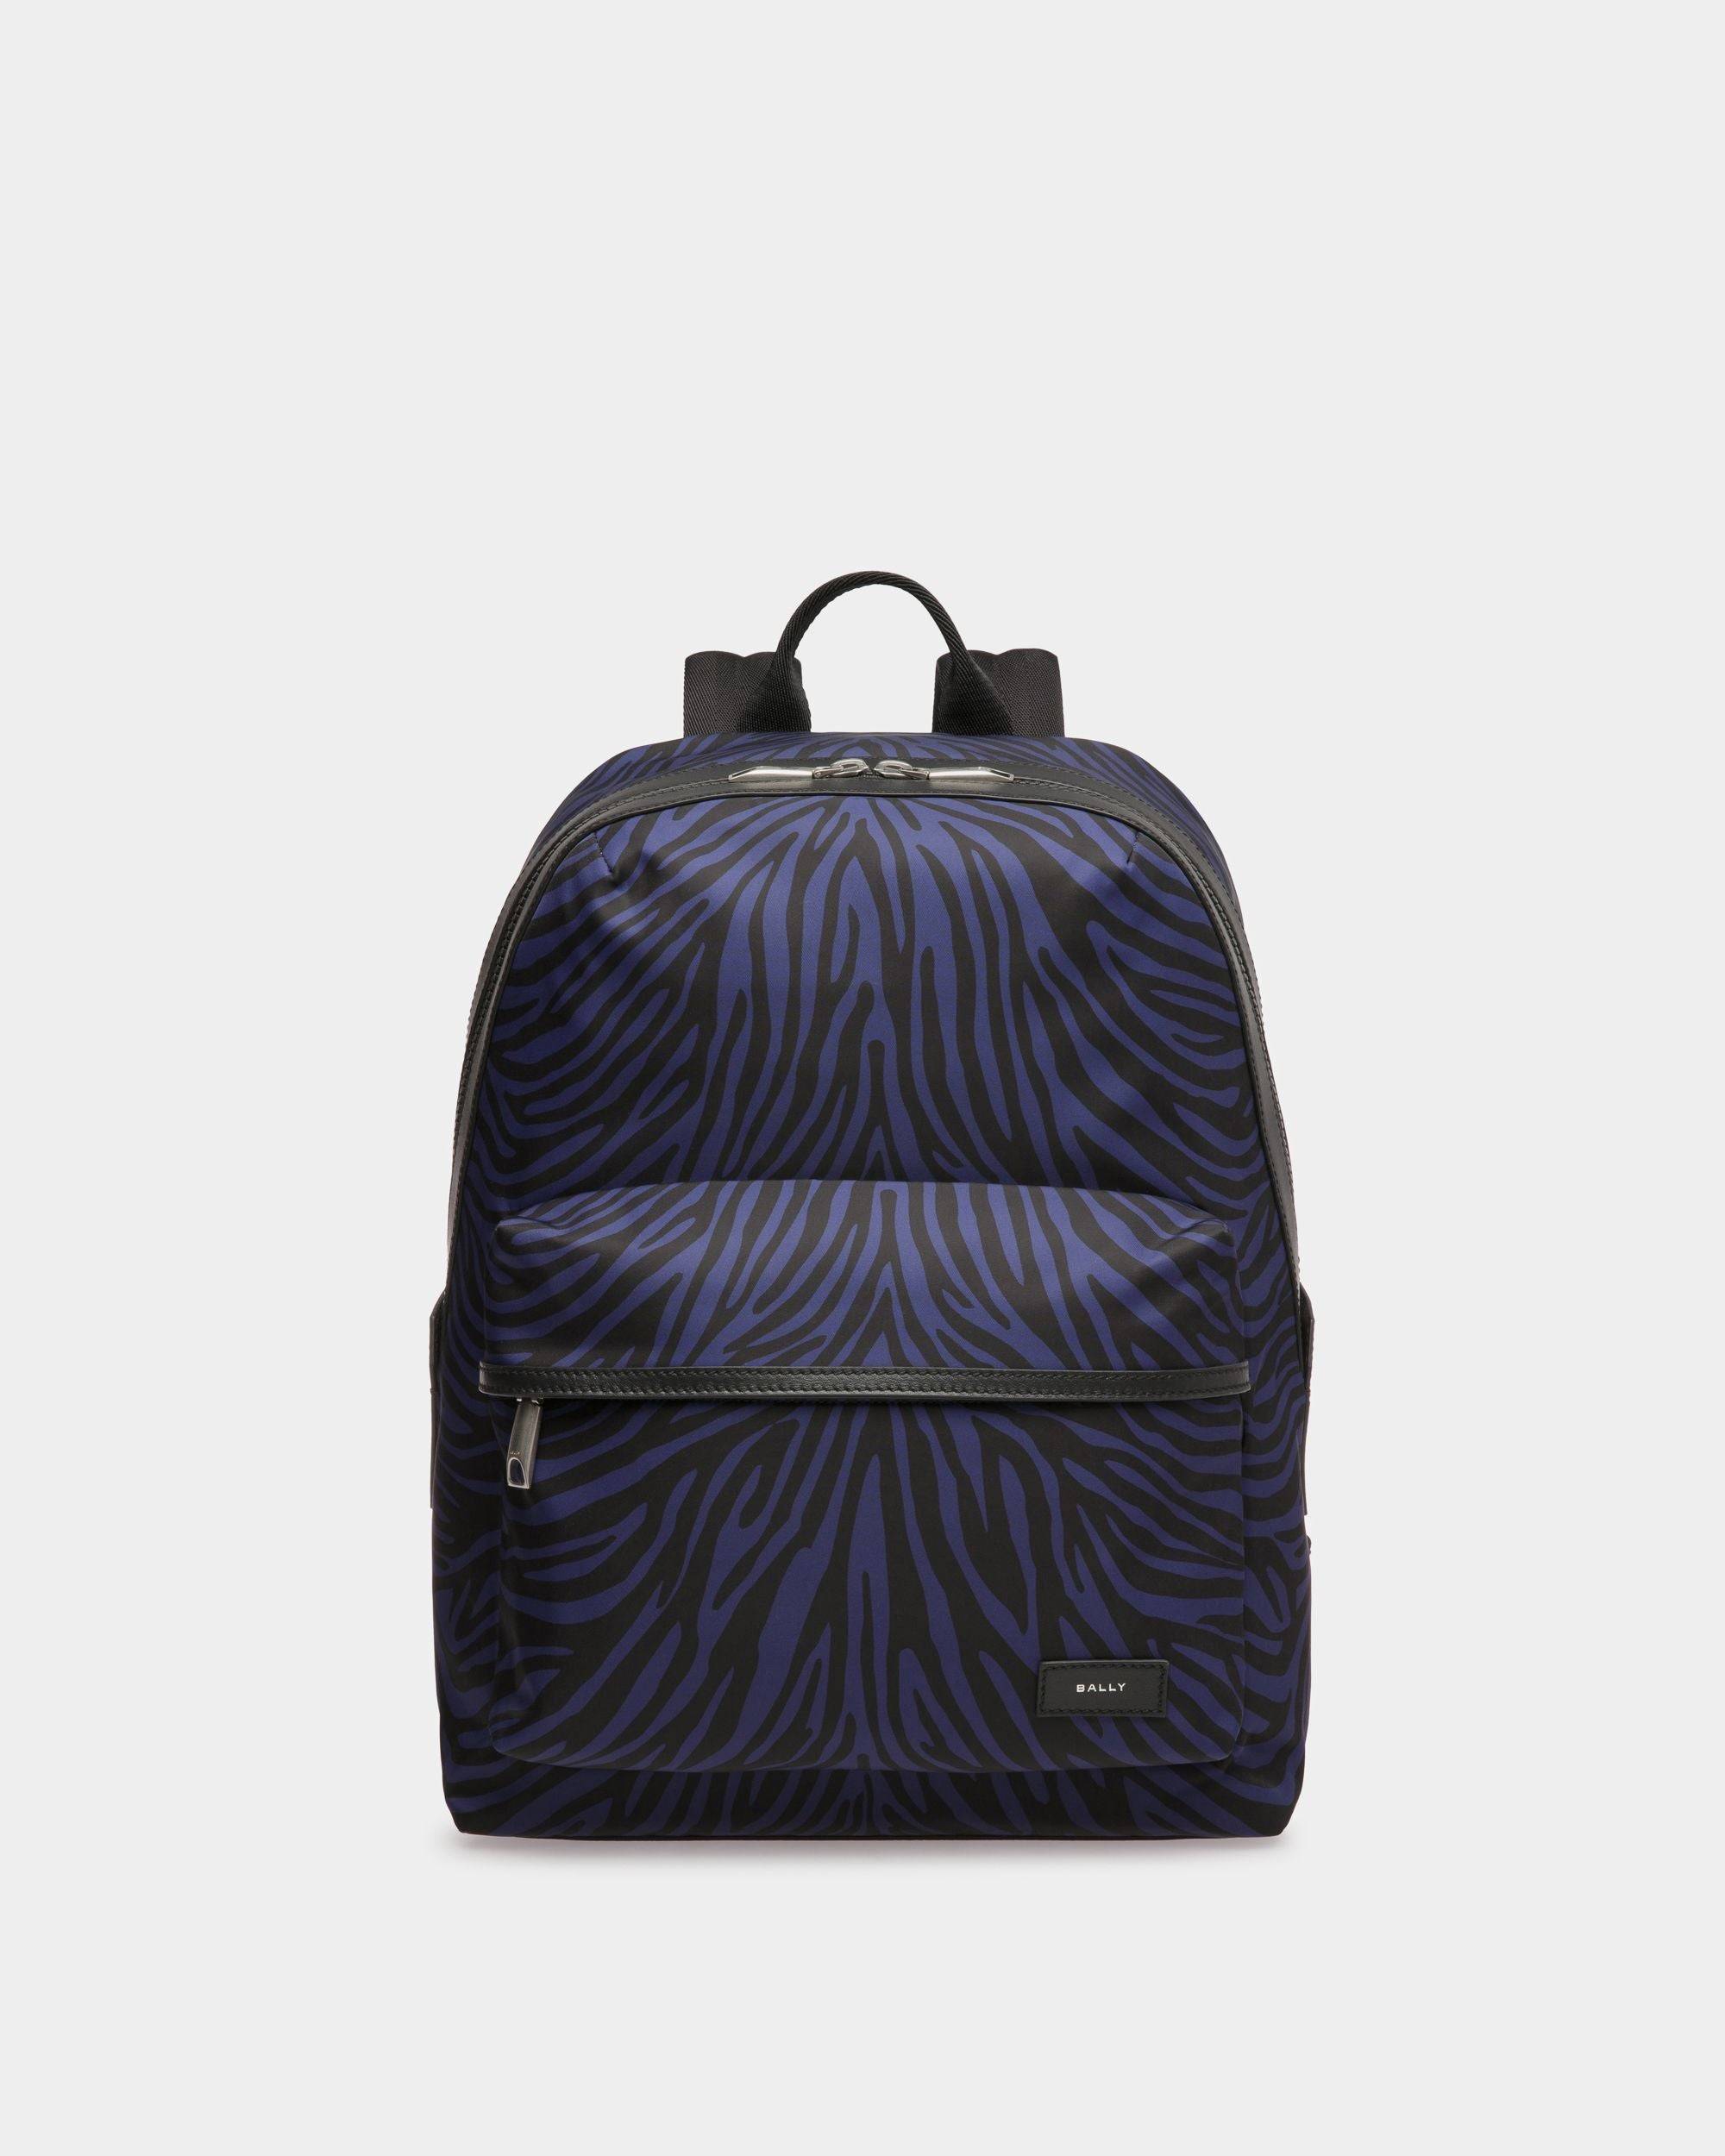 Men's Zebra Crossing Backpack In Marine And Black Fabric And Nylon | Bally | Still Life Front